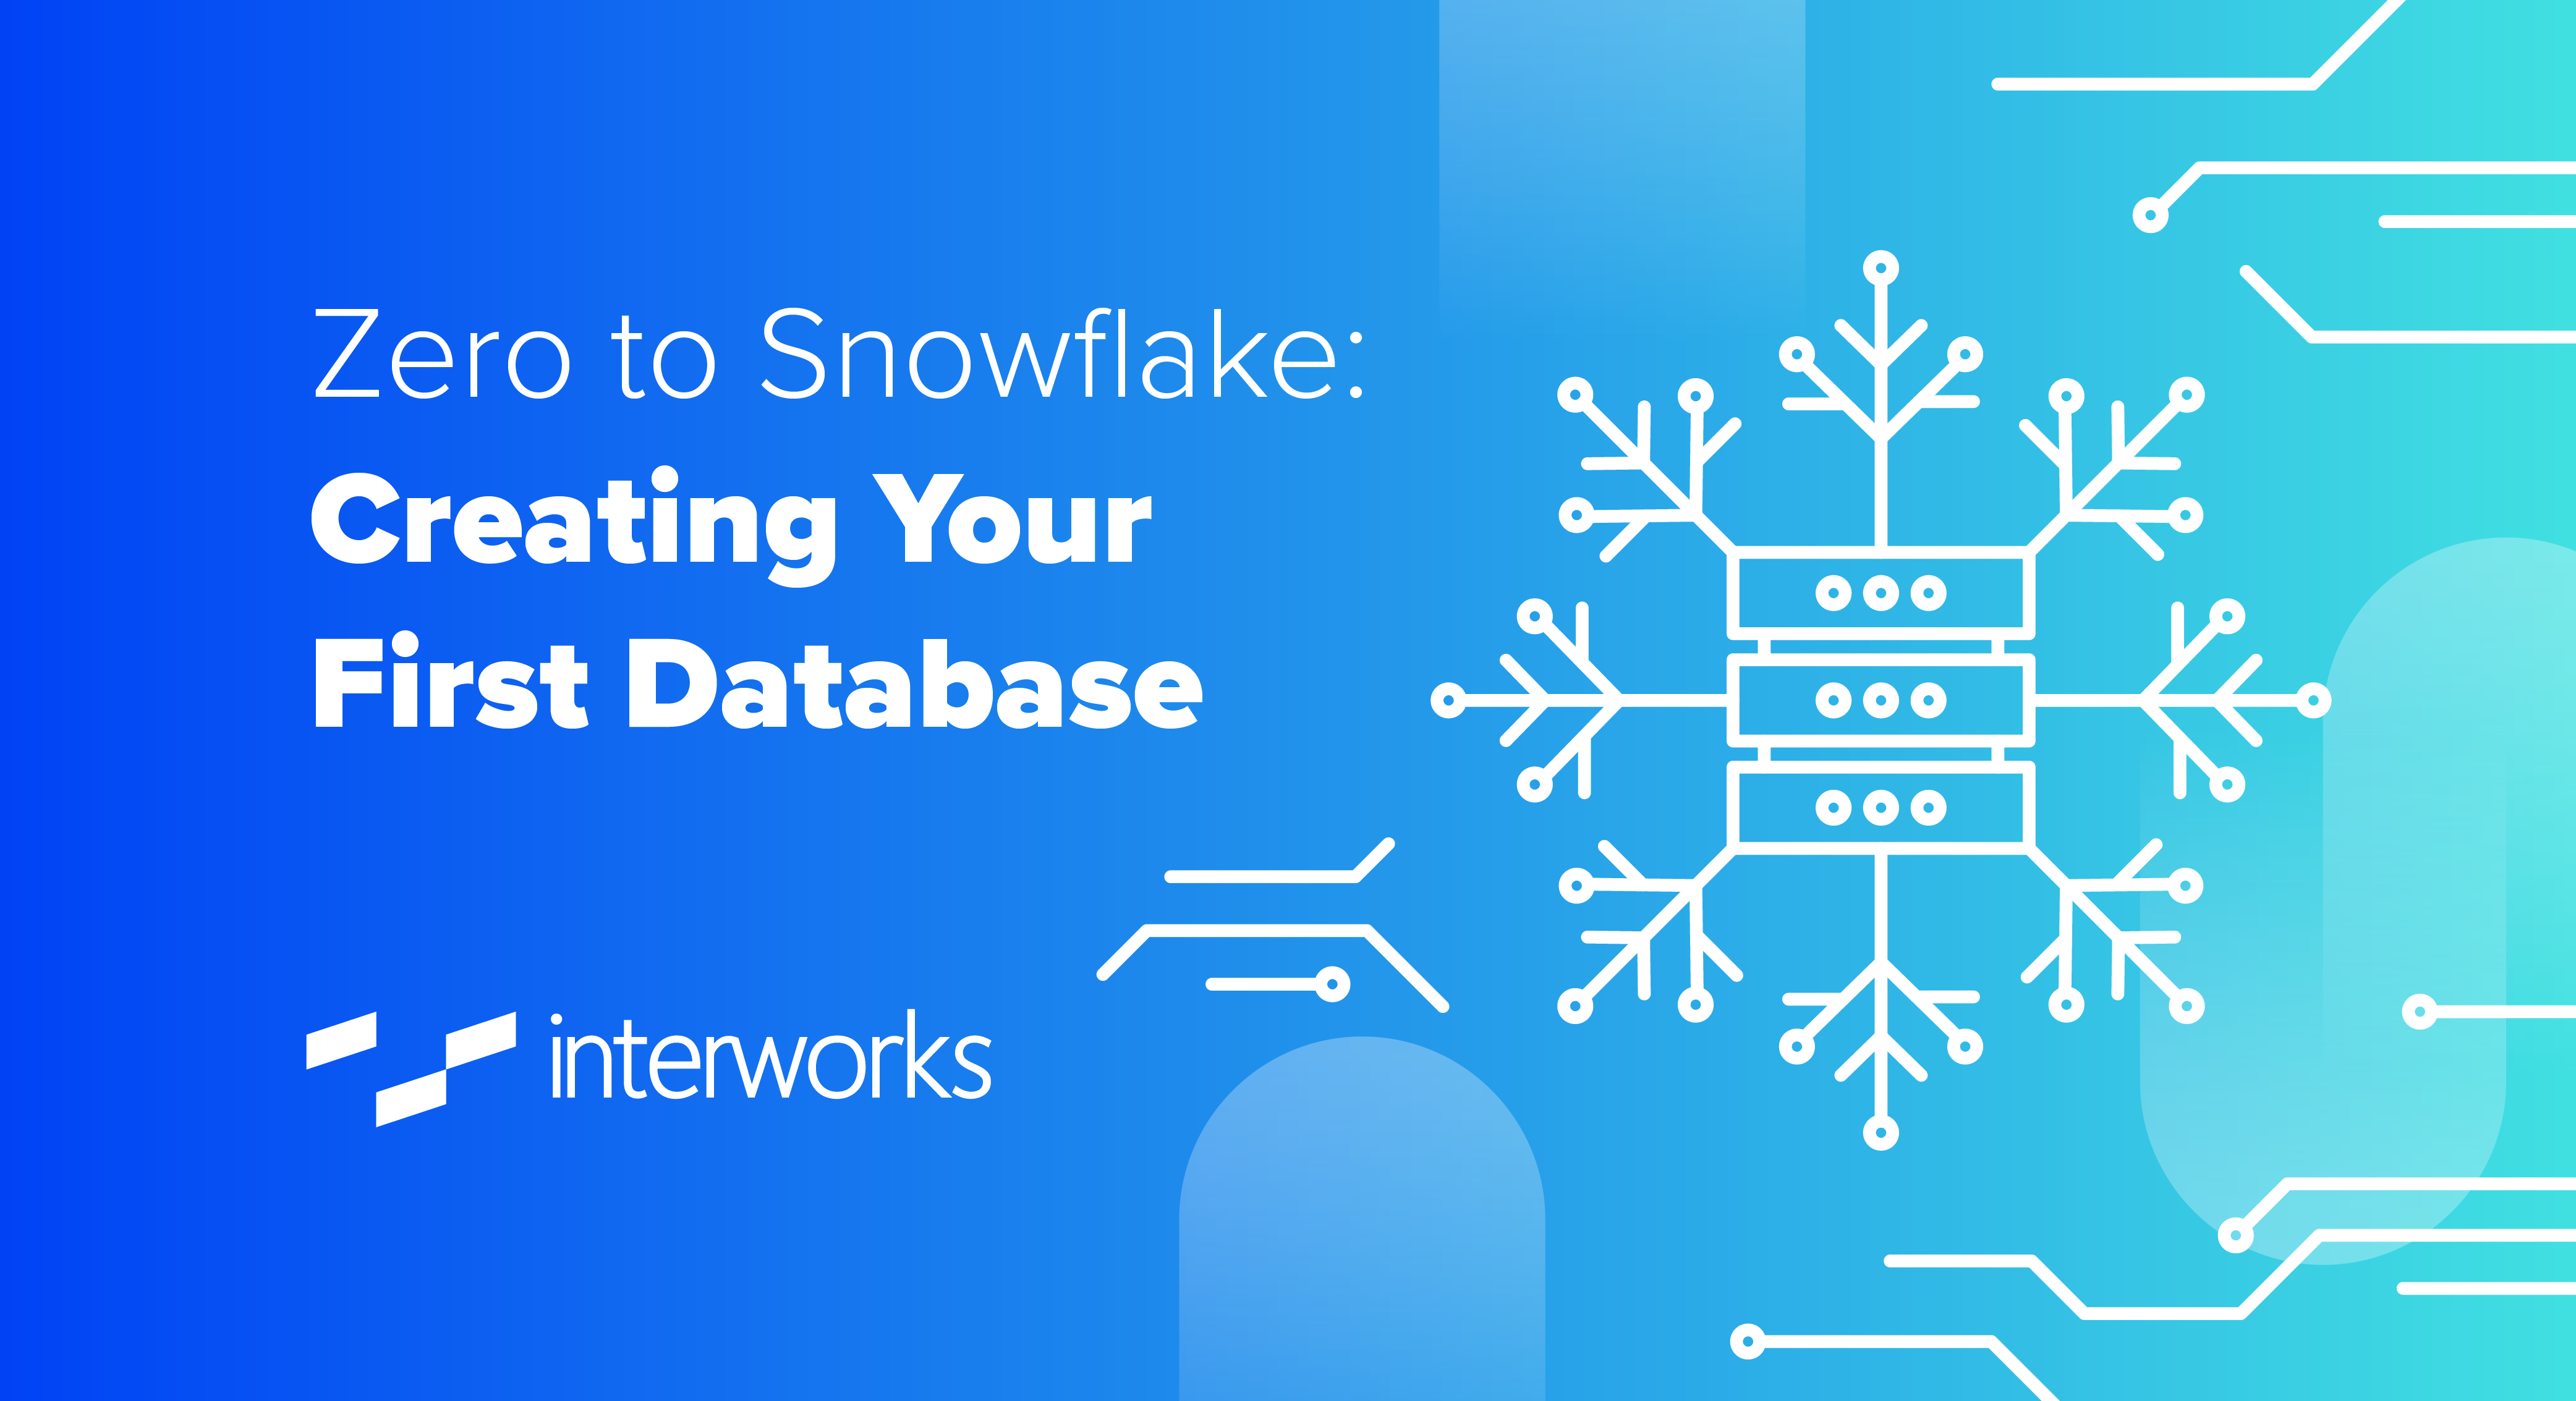 zero-to-snowflake-creating-your-first-database-interworks